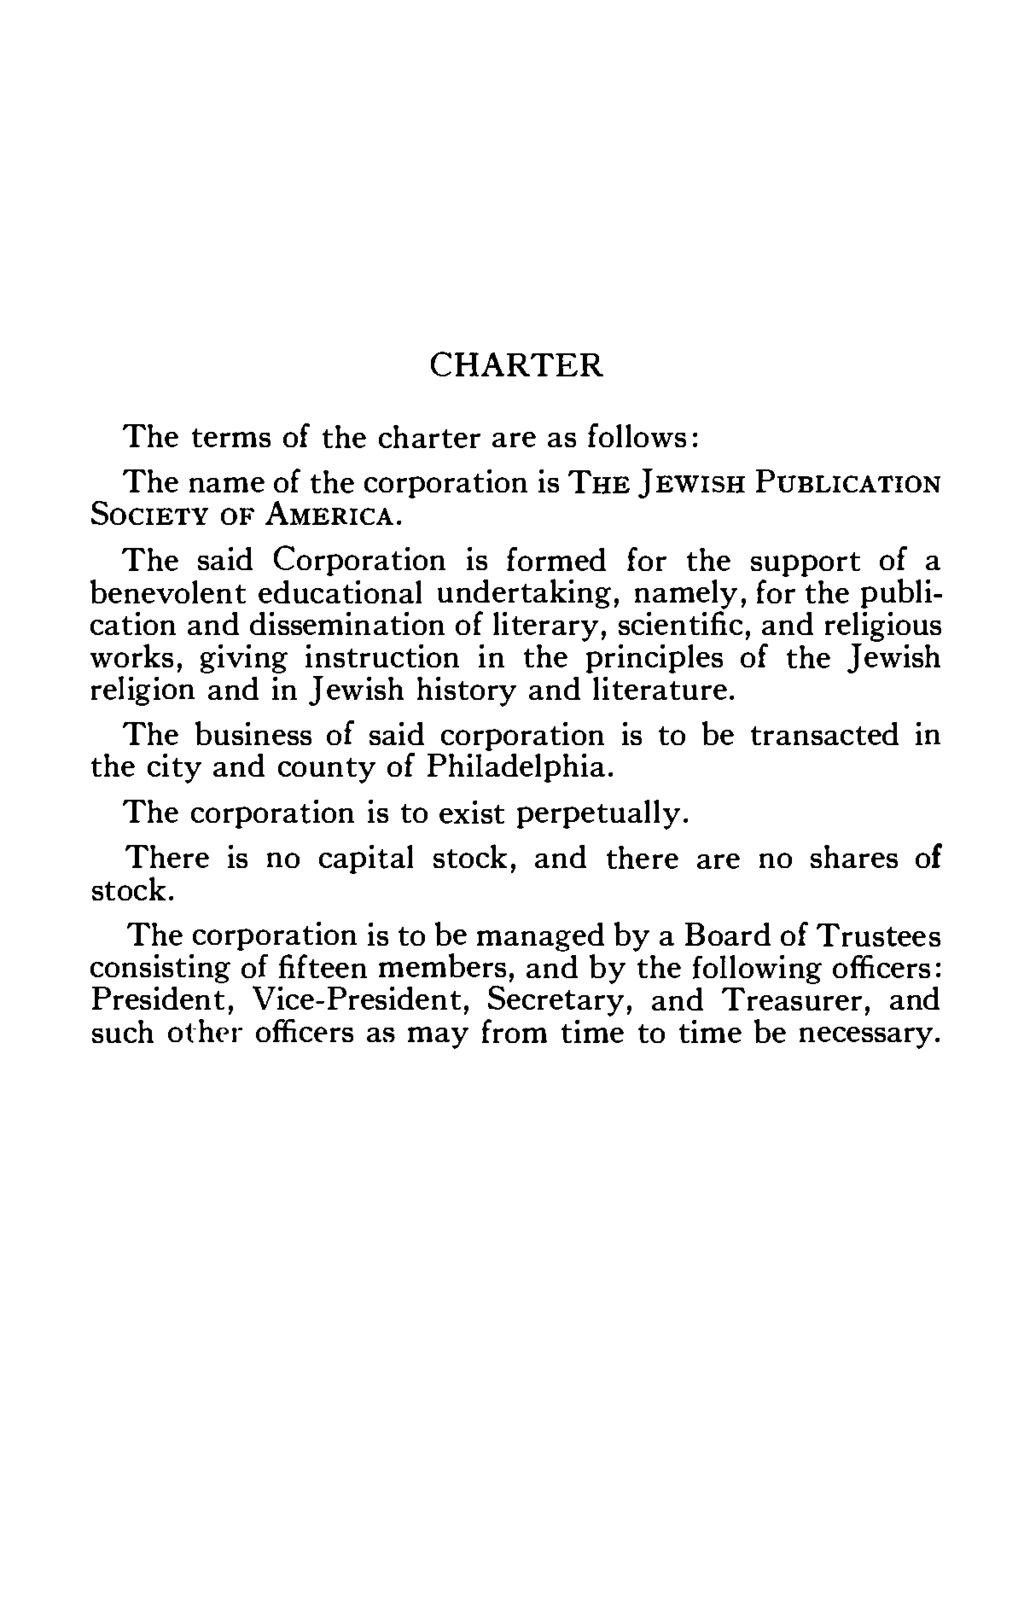 CHARTER The terms of the charter are as follows: The name of the corporation is THE JEWISH PUBLICATION SOCIETY OF AMERICA.